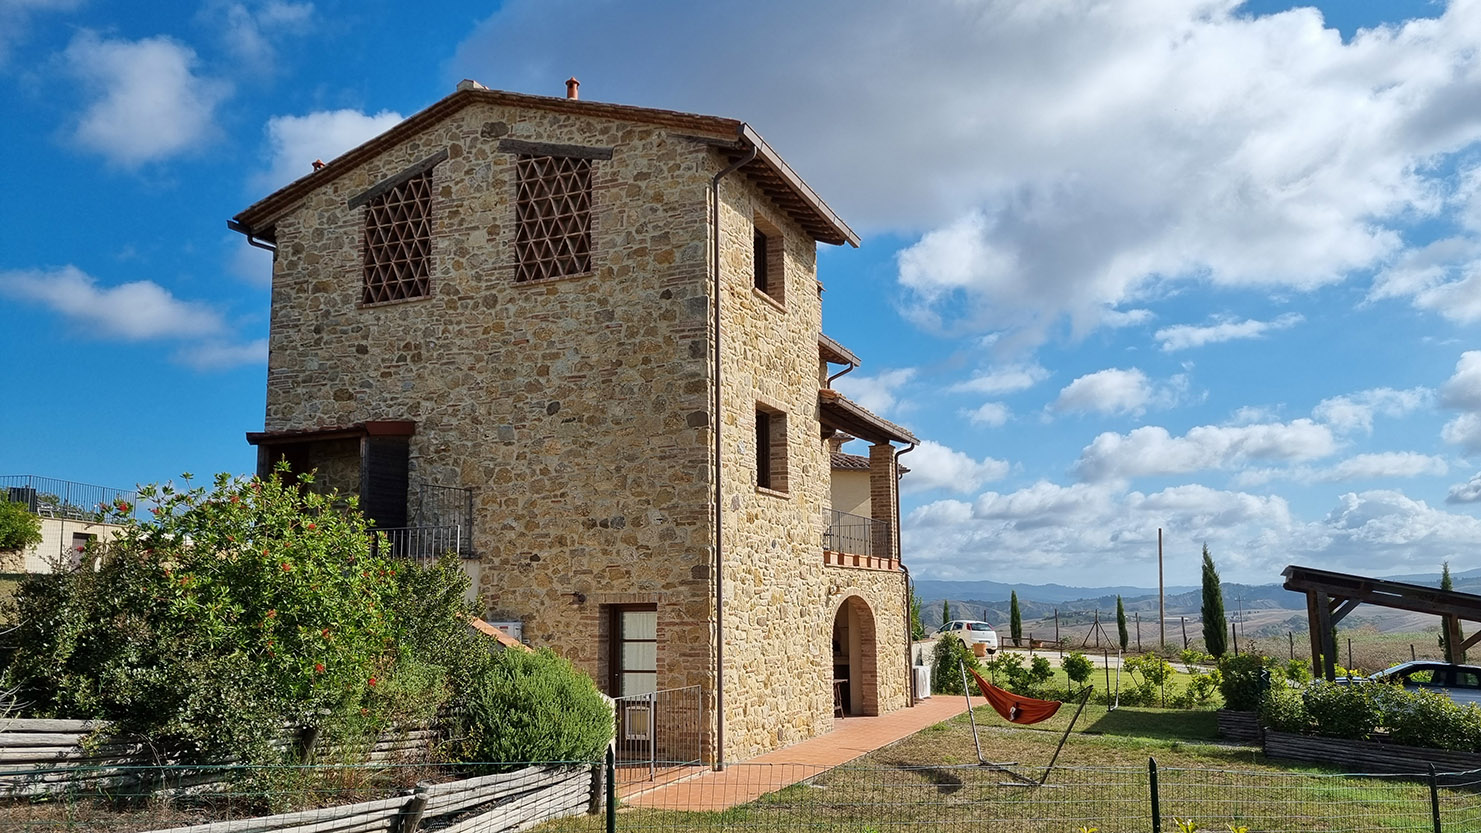 A1 RATING FARMHOUSE, 3 BDR, SHARED SALT WATER SWIMMING POOL, VOLTERRA, PISA TUSCANY